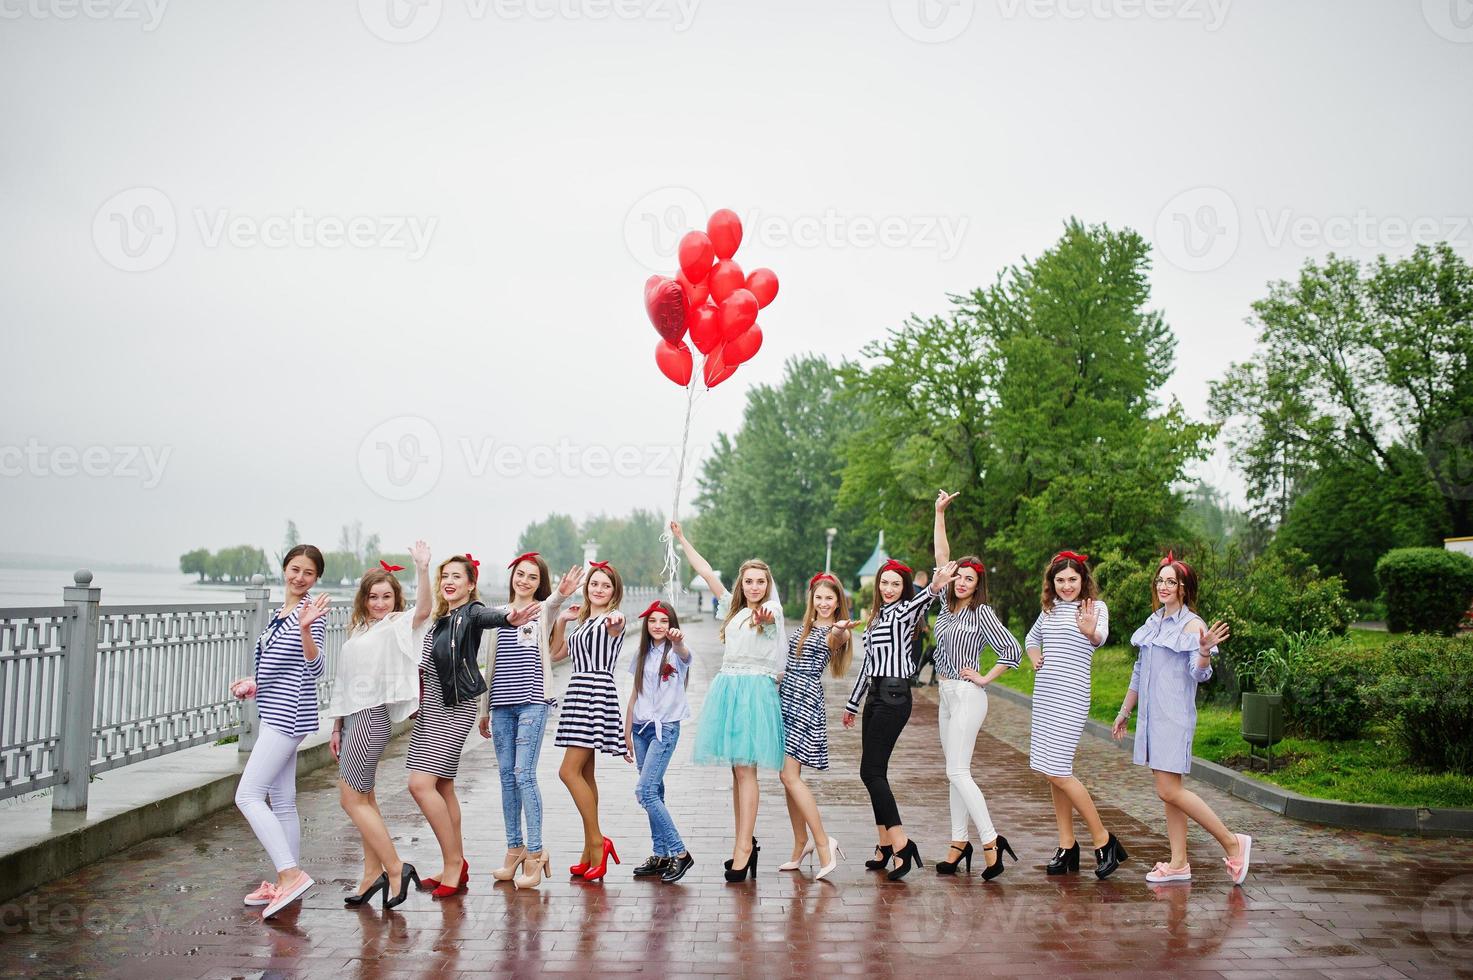 Eleven amazingly-looking braidsmaids with stunning bride posing with red heart-shaped balloons on the pavement against the lake in the background. photo